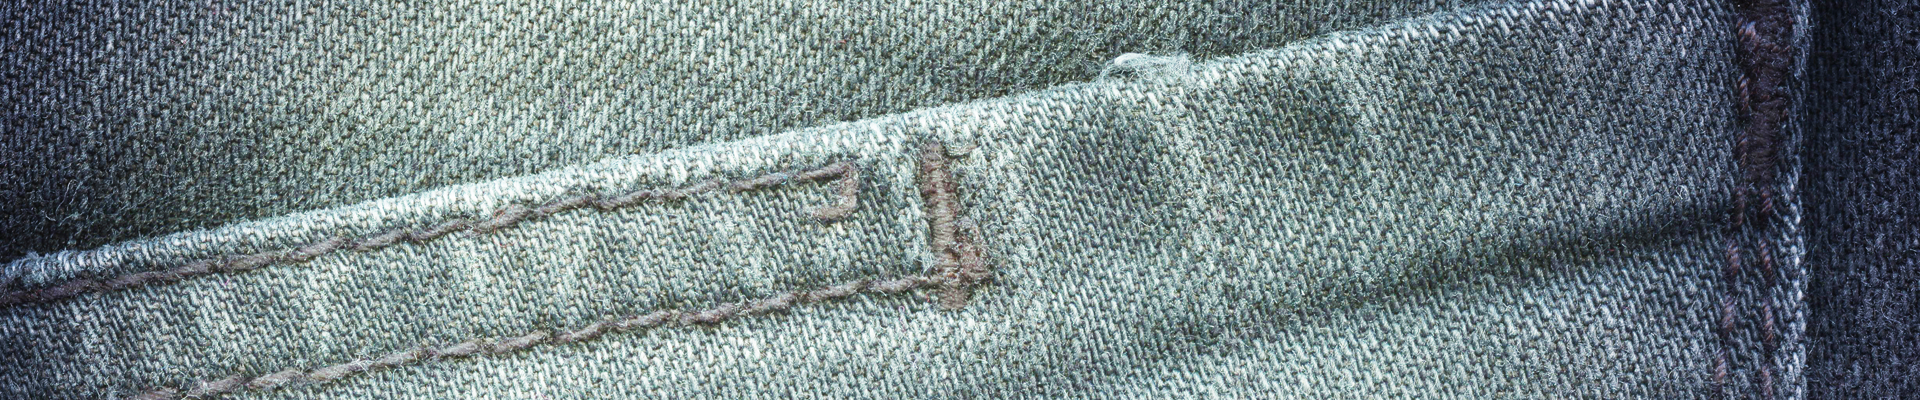 Close up of a jeans pocket 